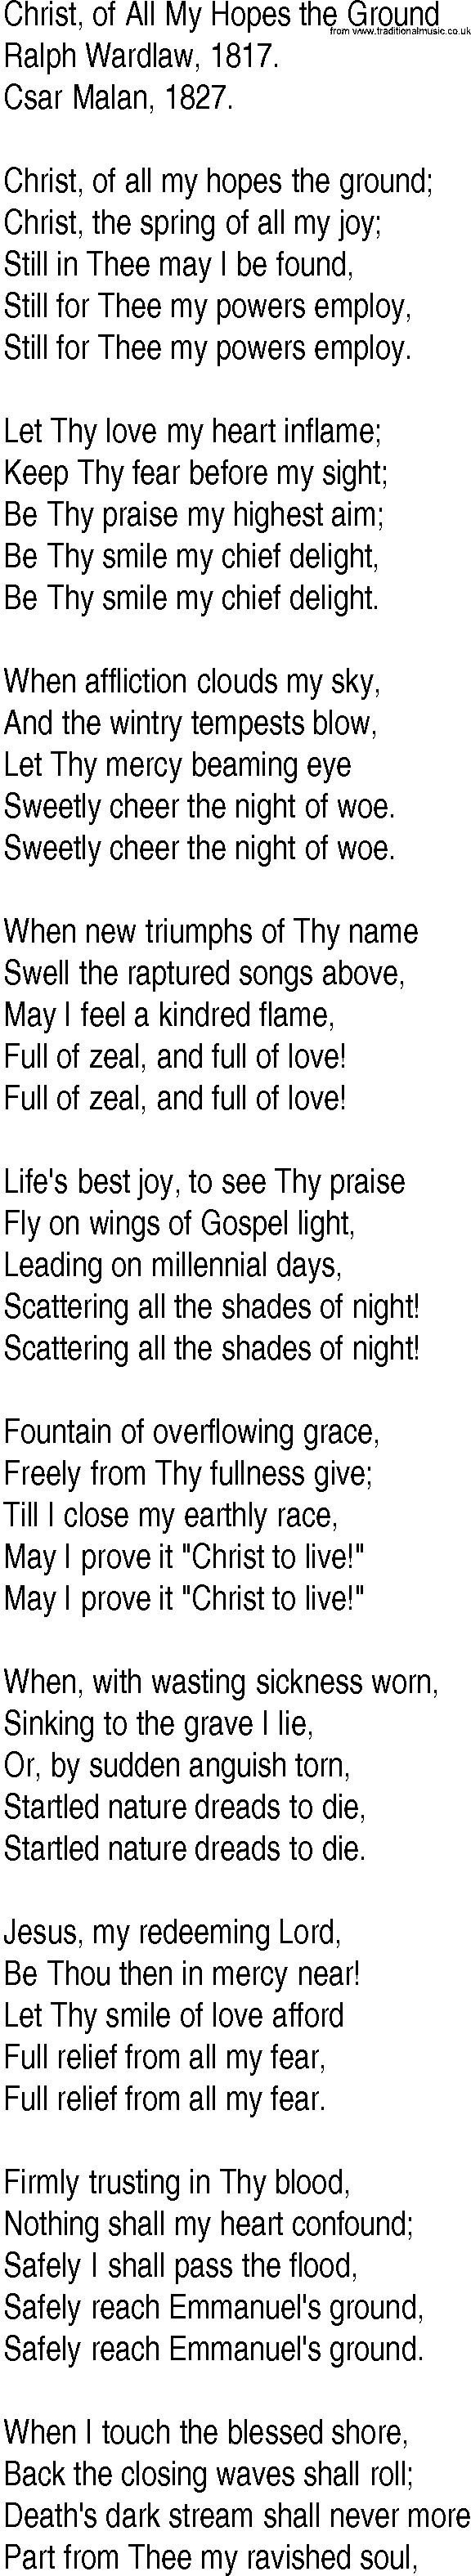 Hymn and Gospel Song: Christ, of All My Hopes the Ground by Ralph Wardlaw lyrics